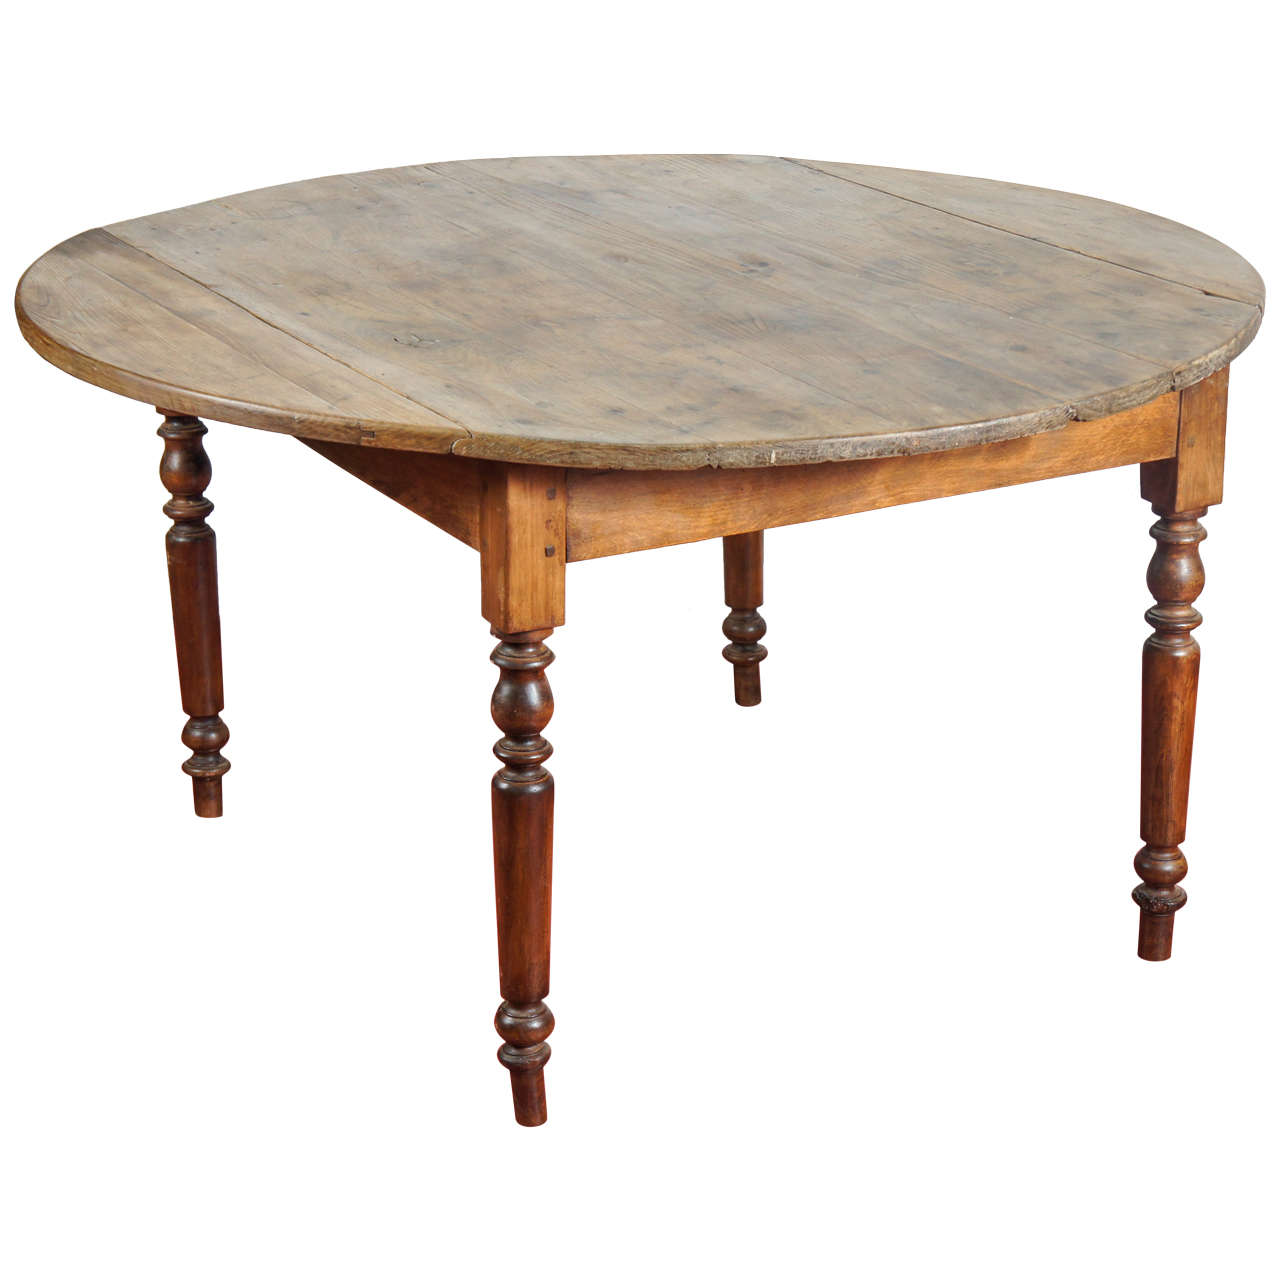 Round Drop Leaf Dining Table 9 For, Antique Round Drop Leaf Dining Table